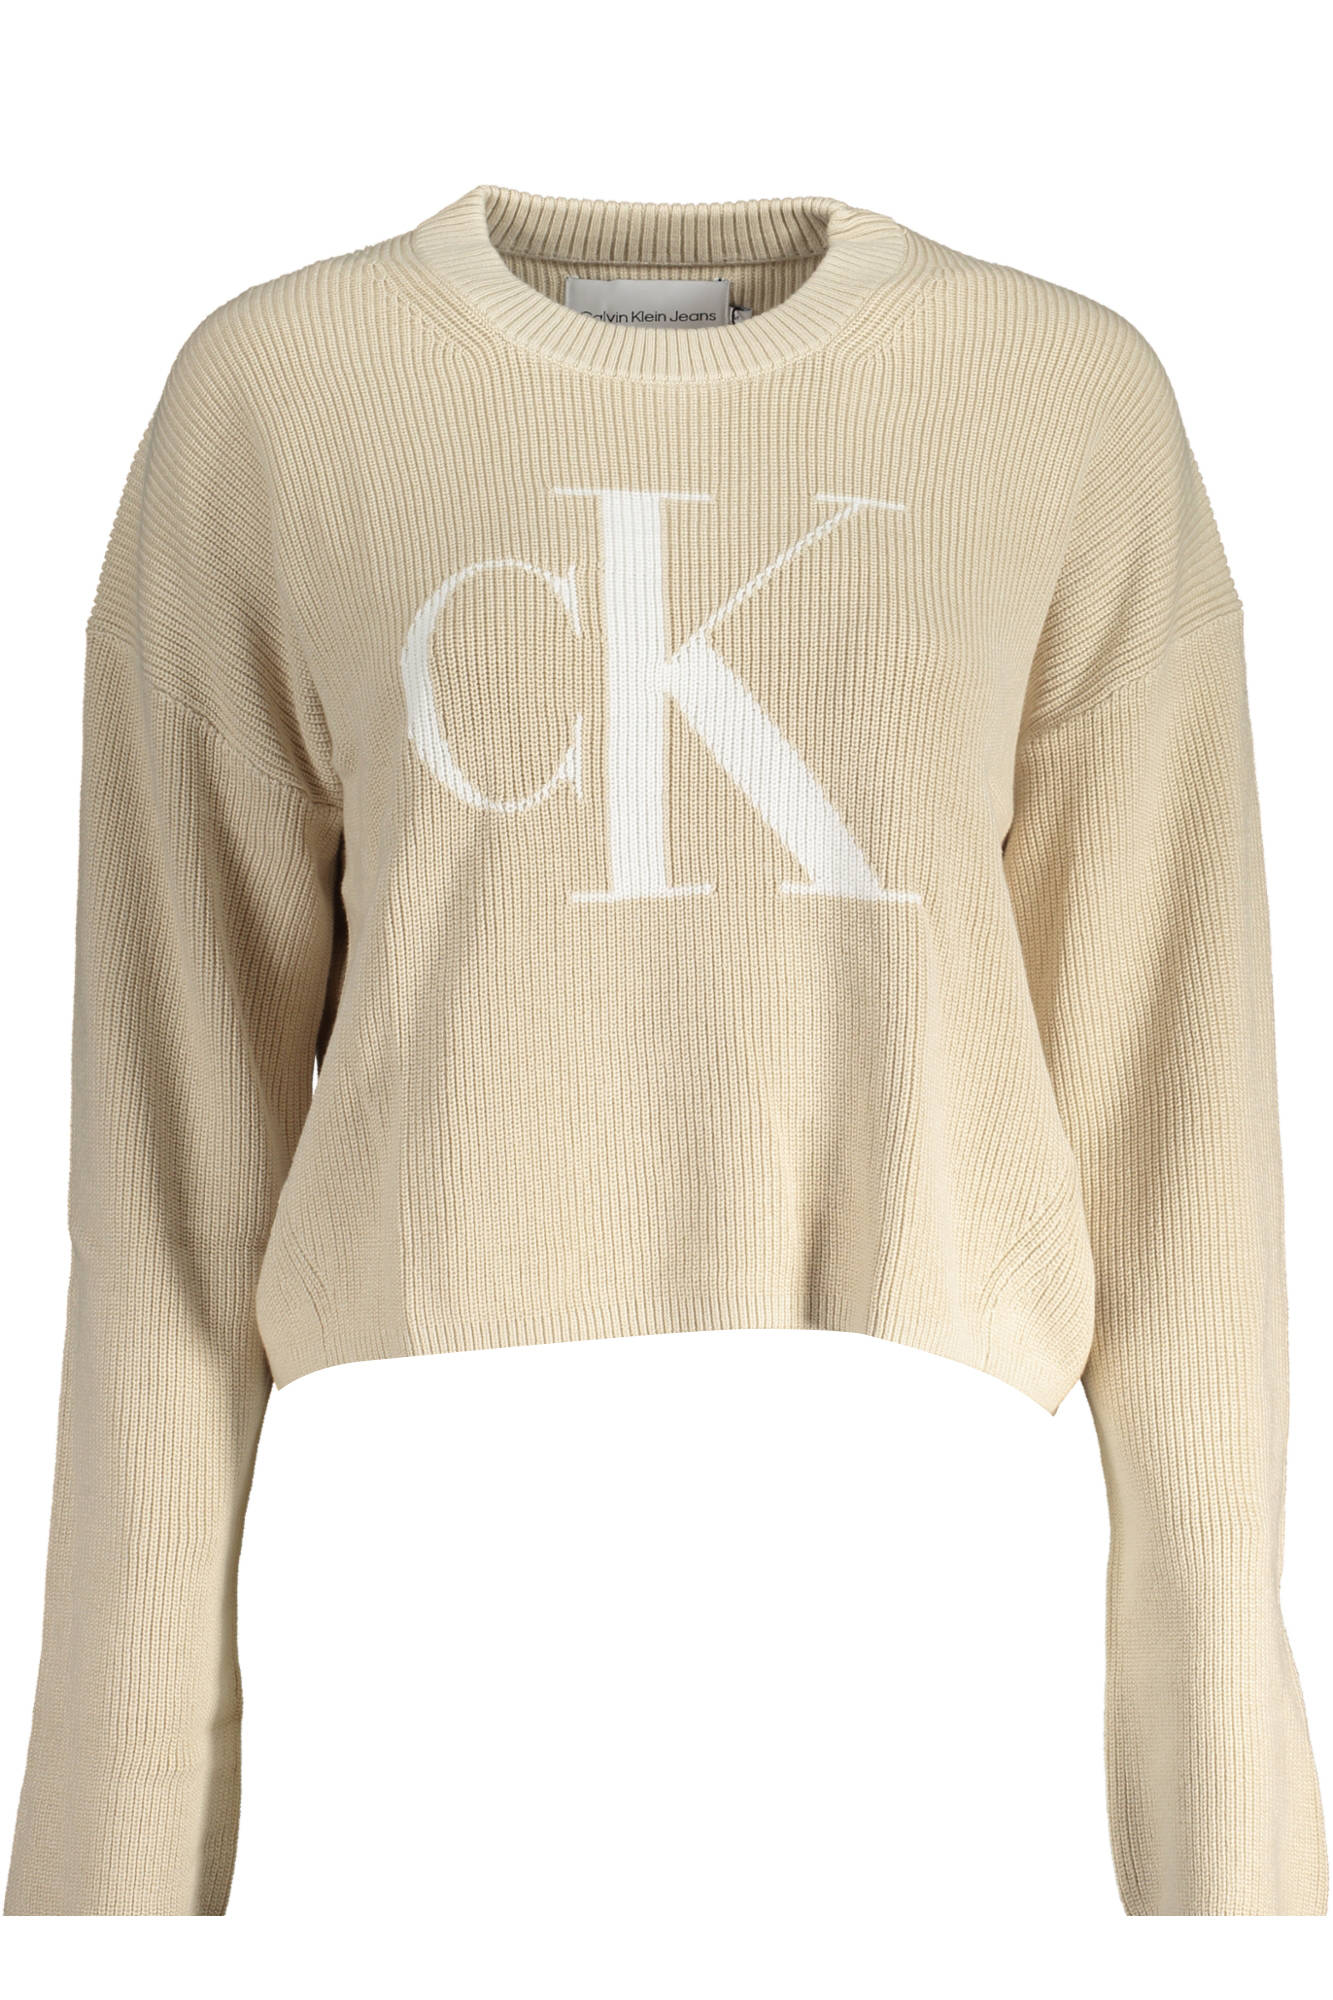 Clothing for men and women Brand: Calvin Klein - Italy, New - The wholesale  platform